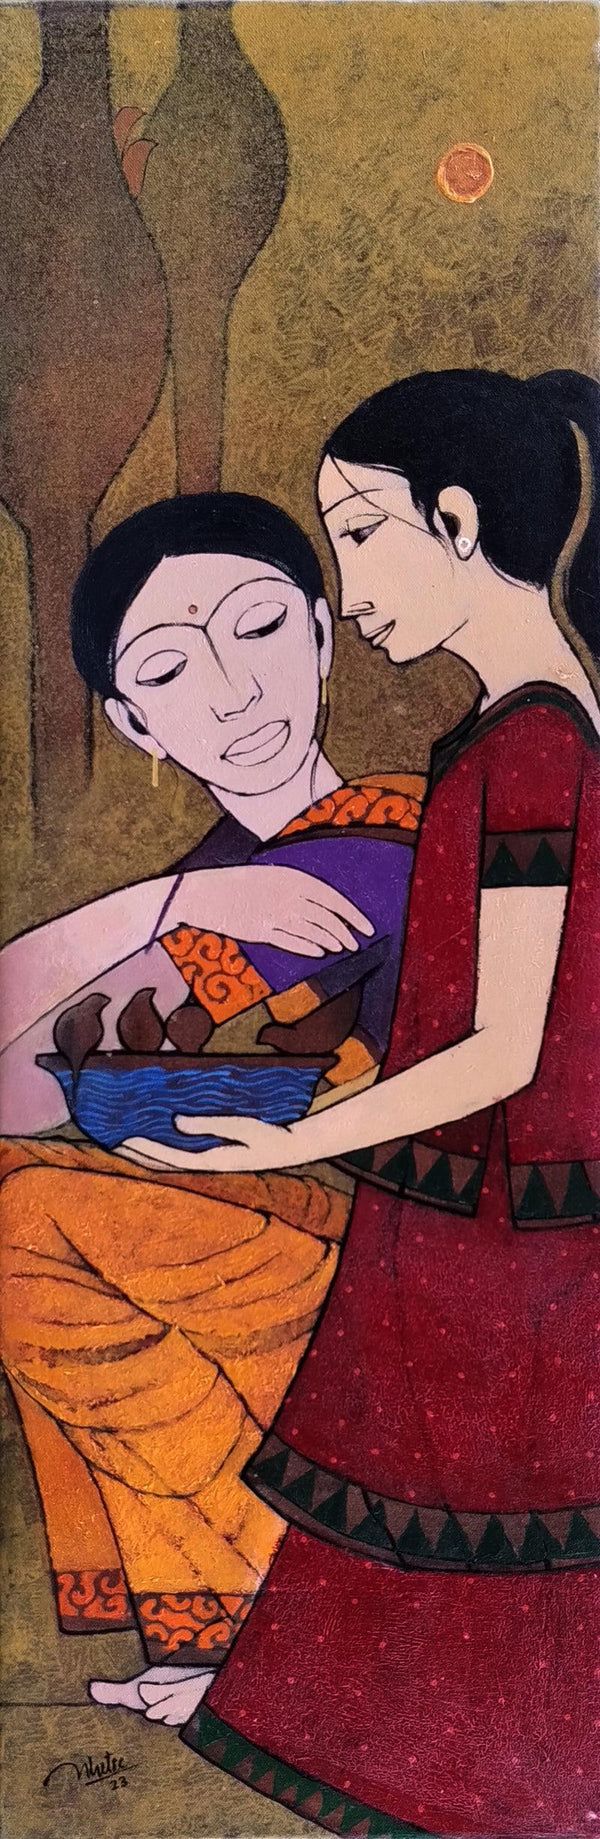 Figurative acrylic painting titled 'Satisfaction', 36x12 inches, by artist Rahul Mhetre on Canvas